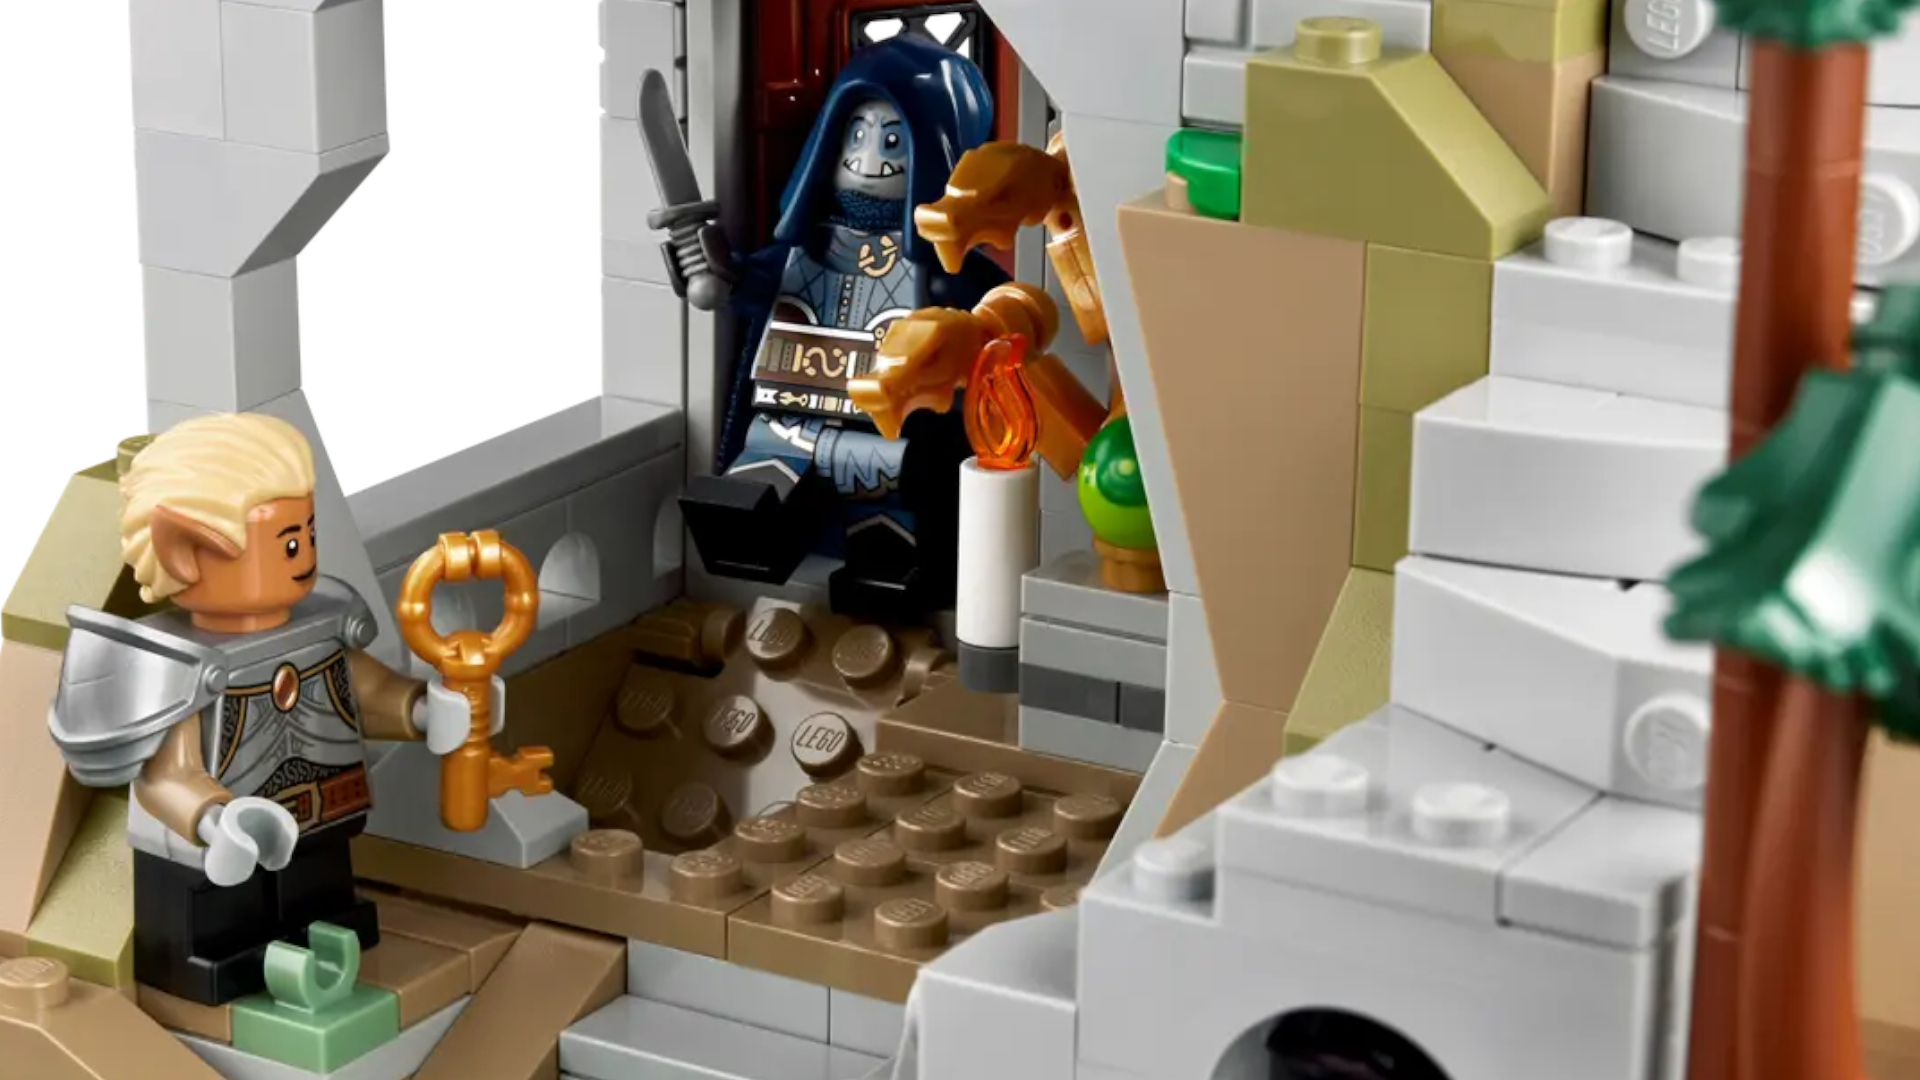 Lego adventurer minifigs explore a dungeon in the D&D set